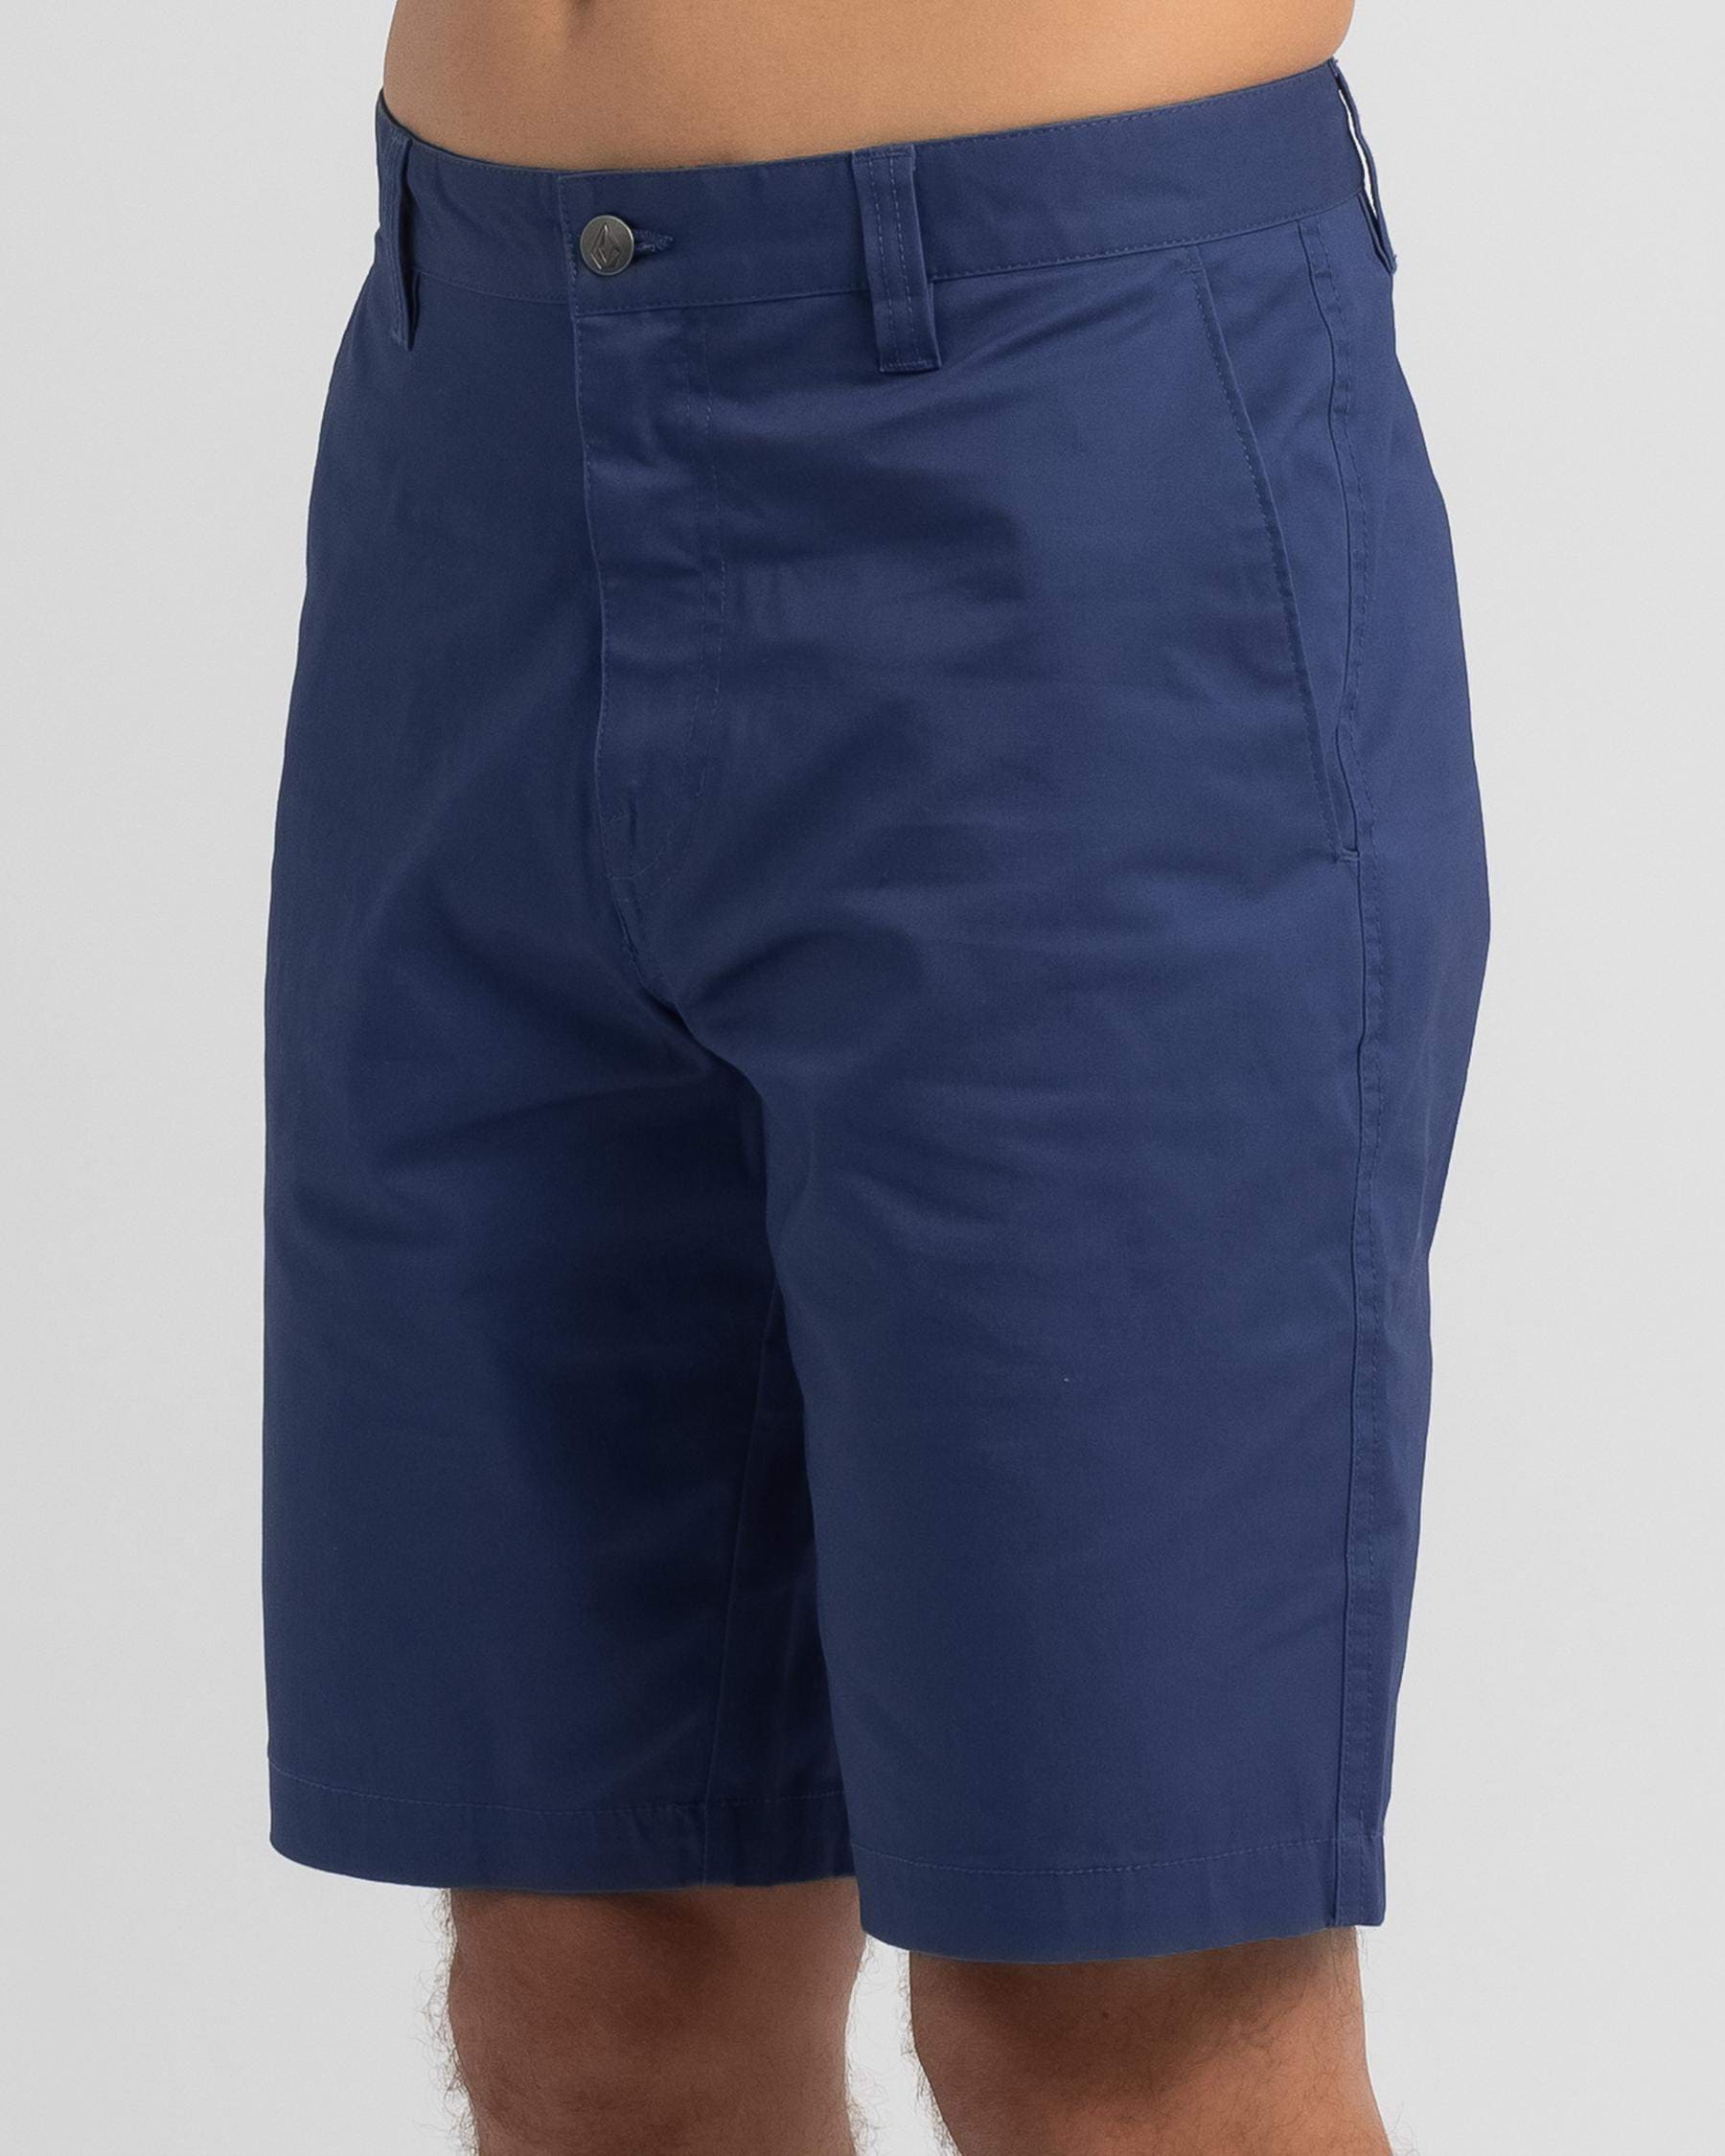 Volcom Cleaver Shorts In Smokey Blue - Fast Shipping & Easy Returns ...